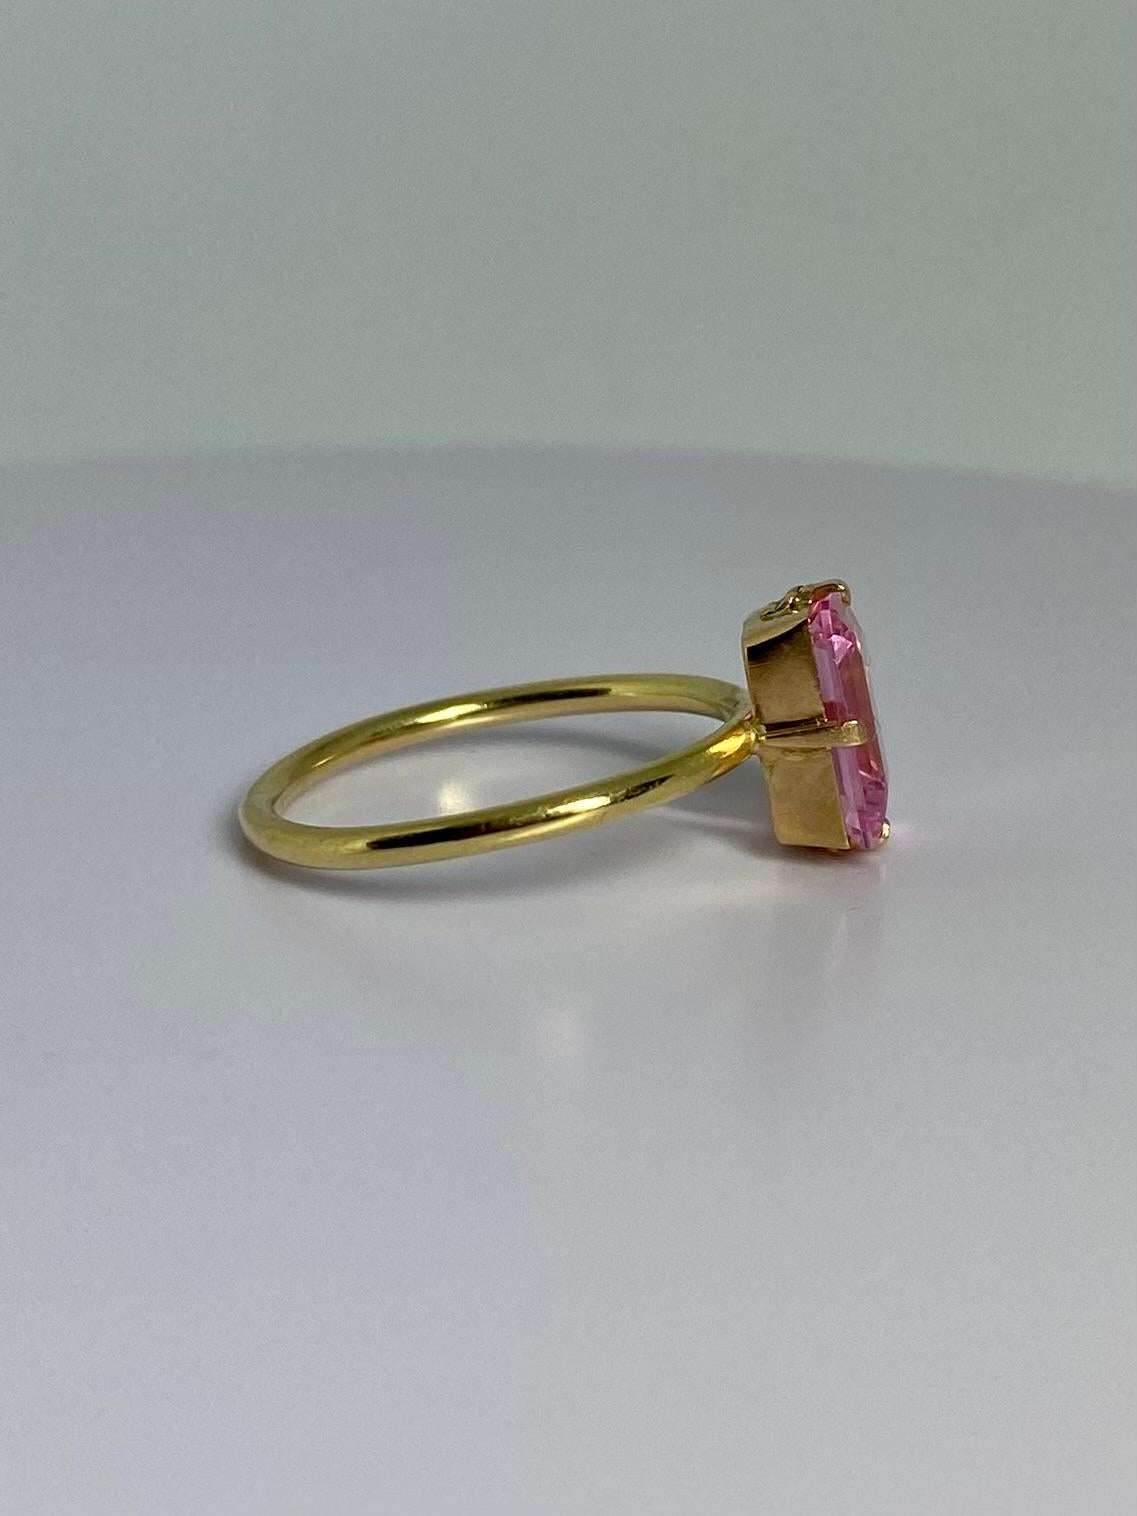 18 Carat Gold Ring with Roses De France, pink In Good Condition For Sale In Heemstede, NL